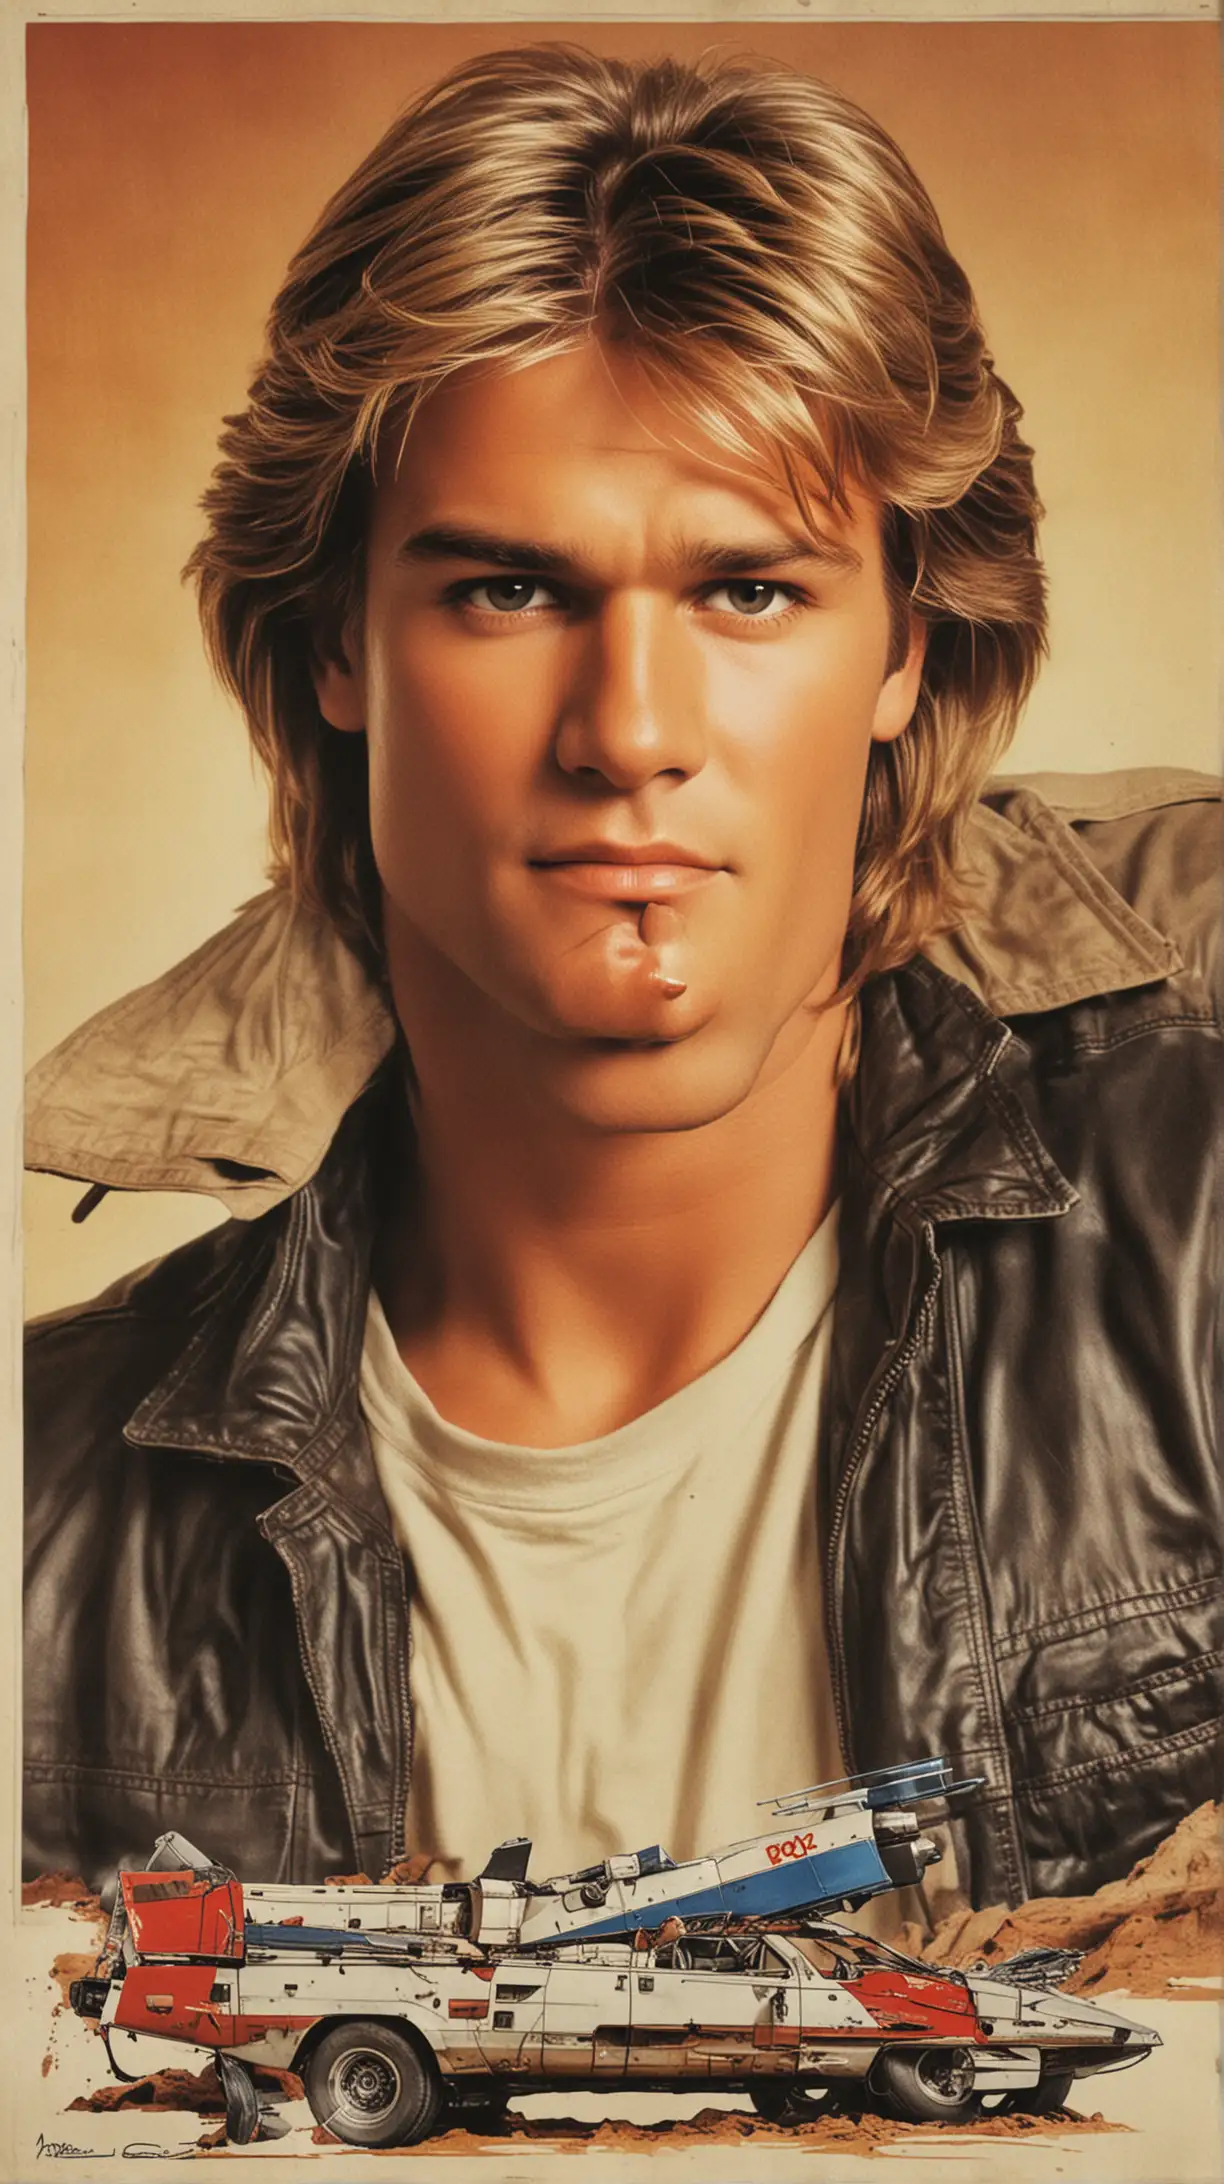 MacGyver Poster 80s Nostalgia and Resourceful Action Hero Art